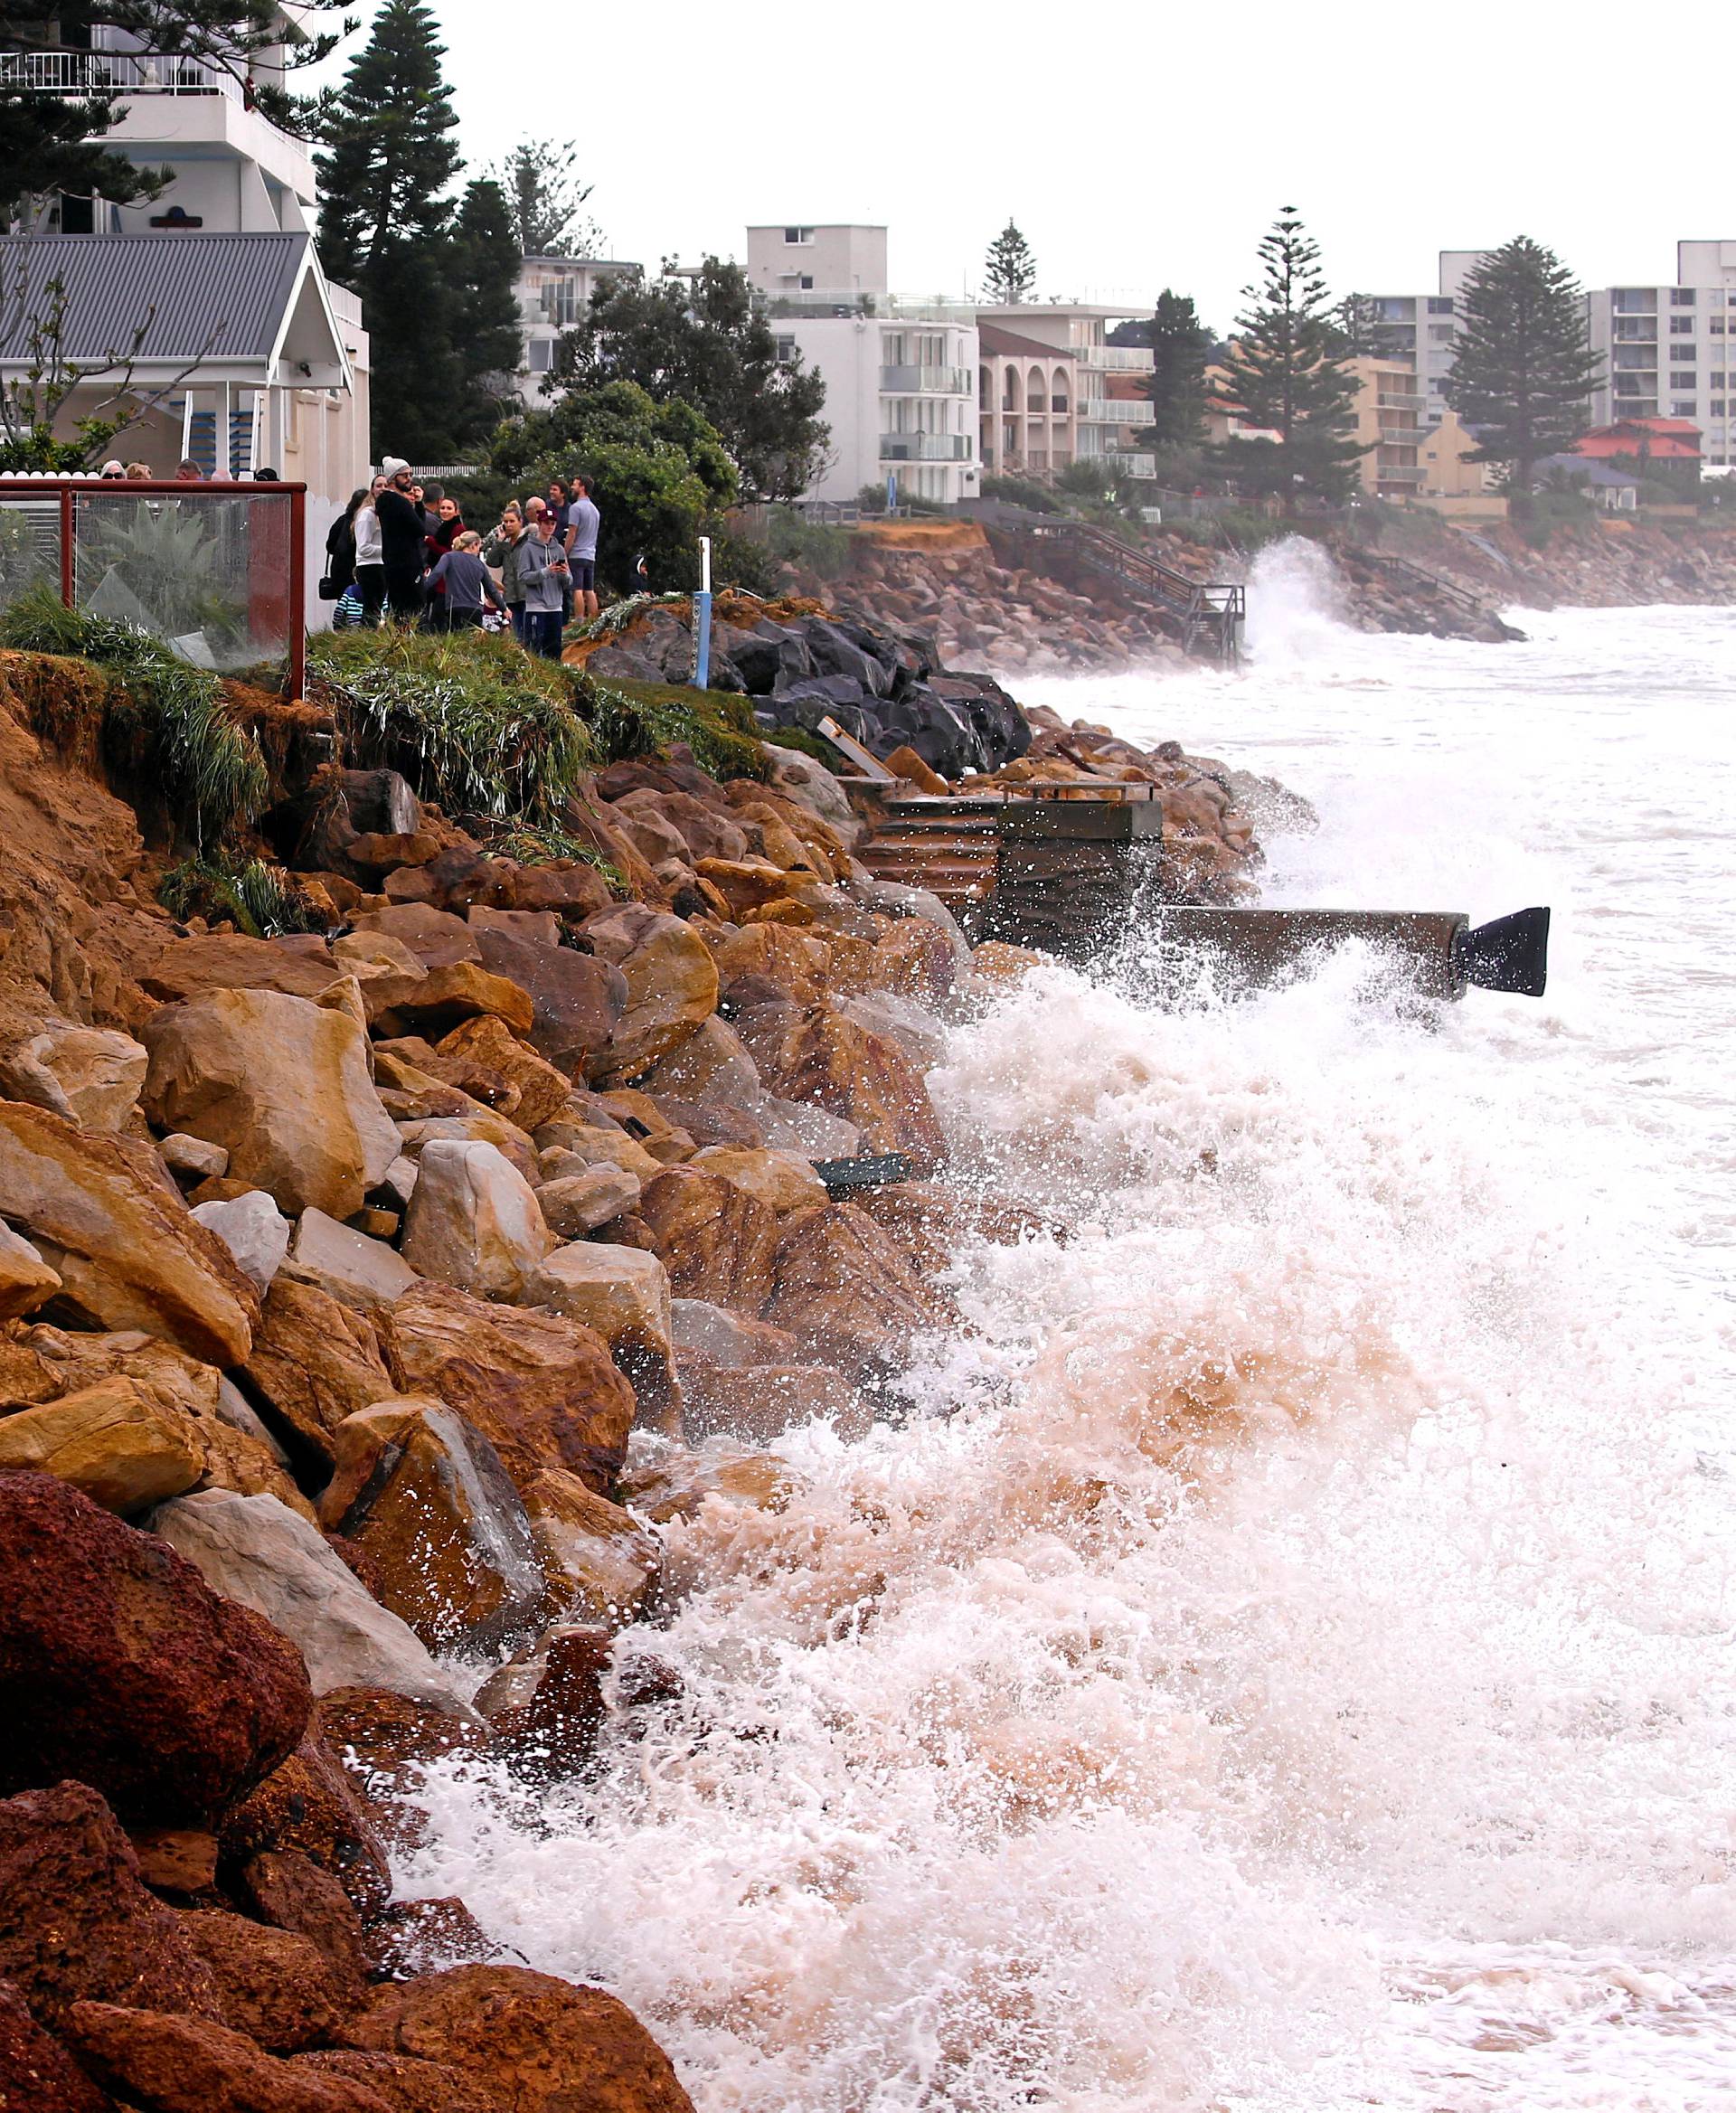 Residents and onlookers inspect the damage to property and a rock wall after severe weather brought strong winds and heavy rain to the east coast of Australia at Collaroy beach in Sydney, Australia